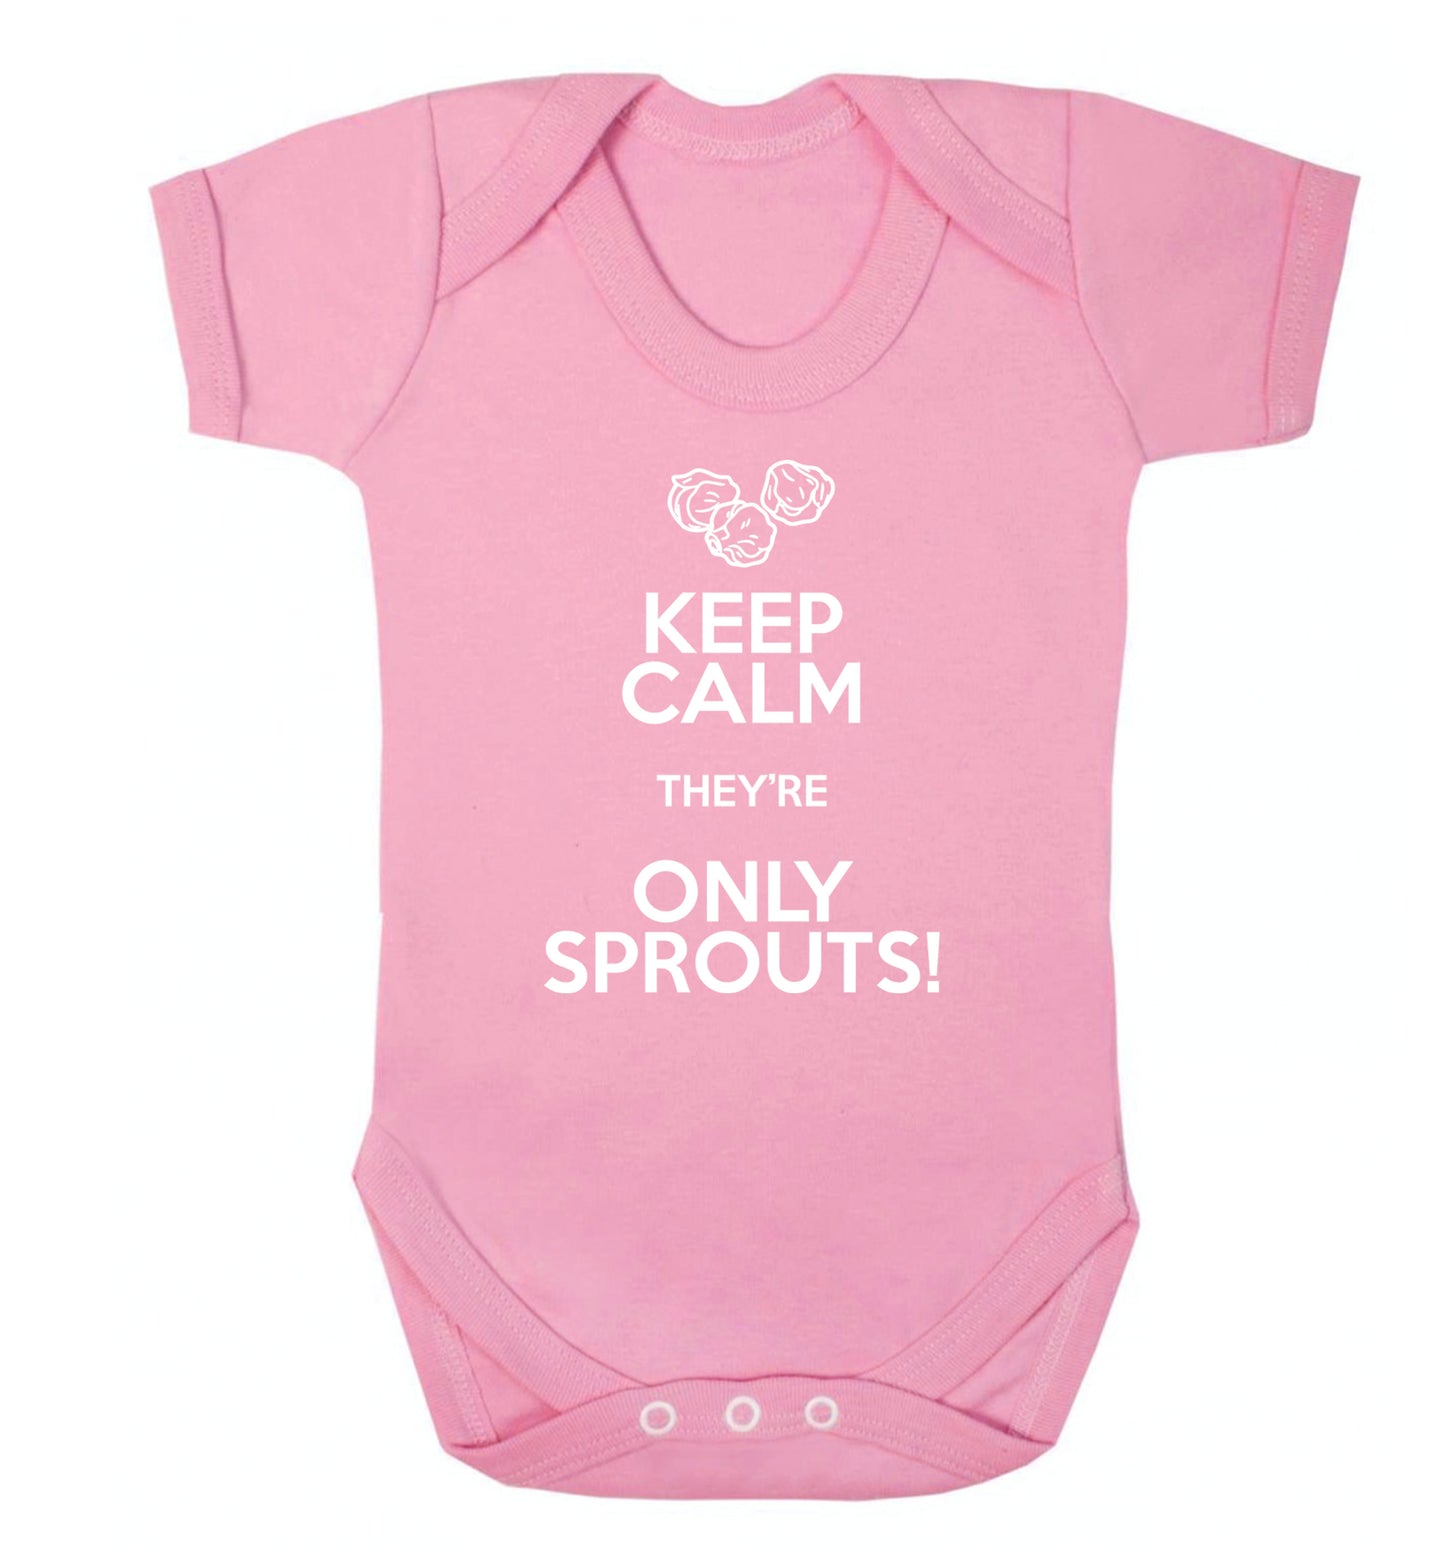 Keep calm they're only sprouts Baby Vest pale pink 18-24 months